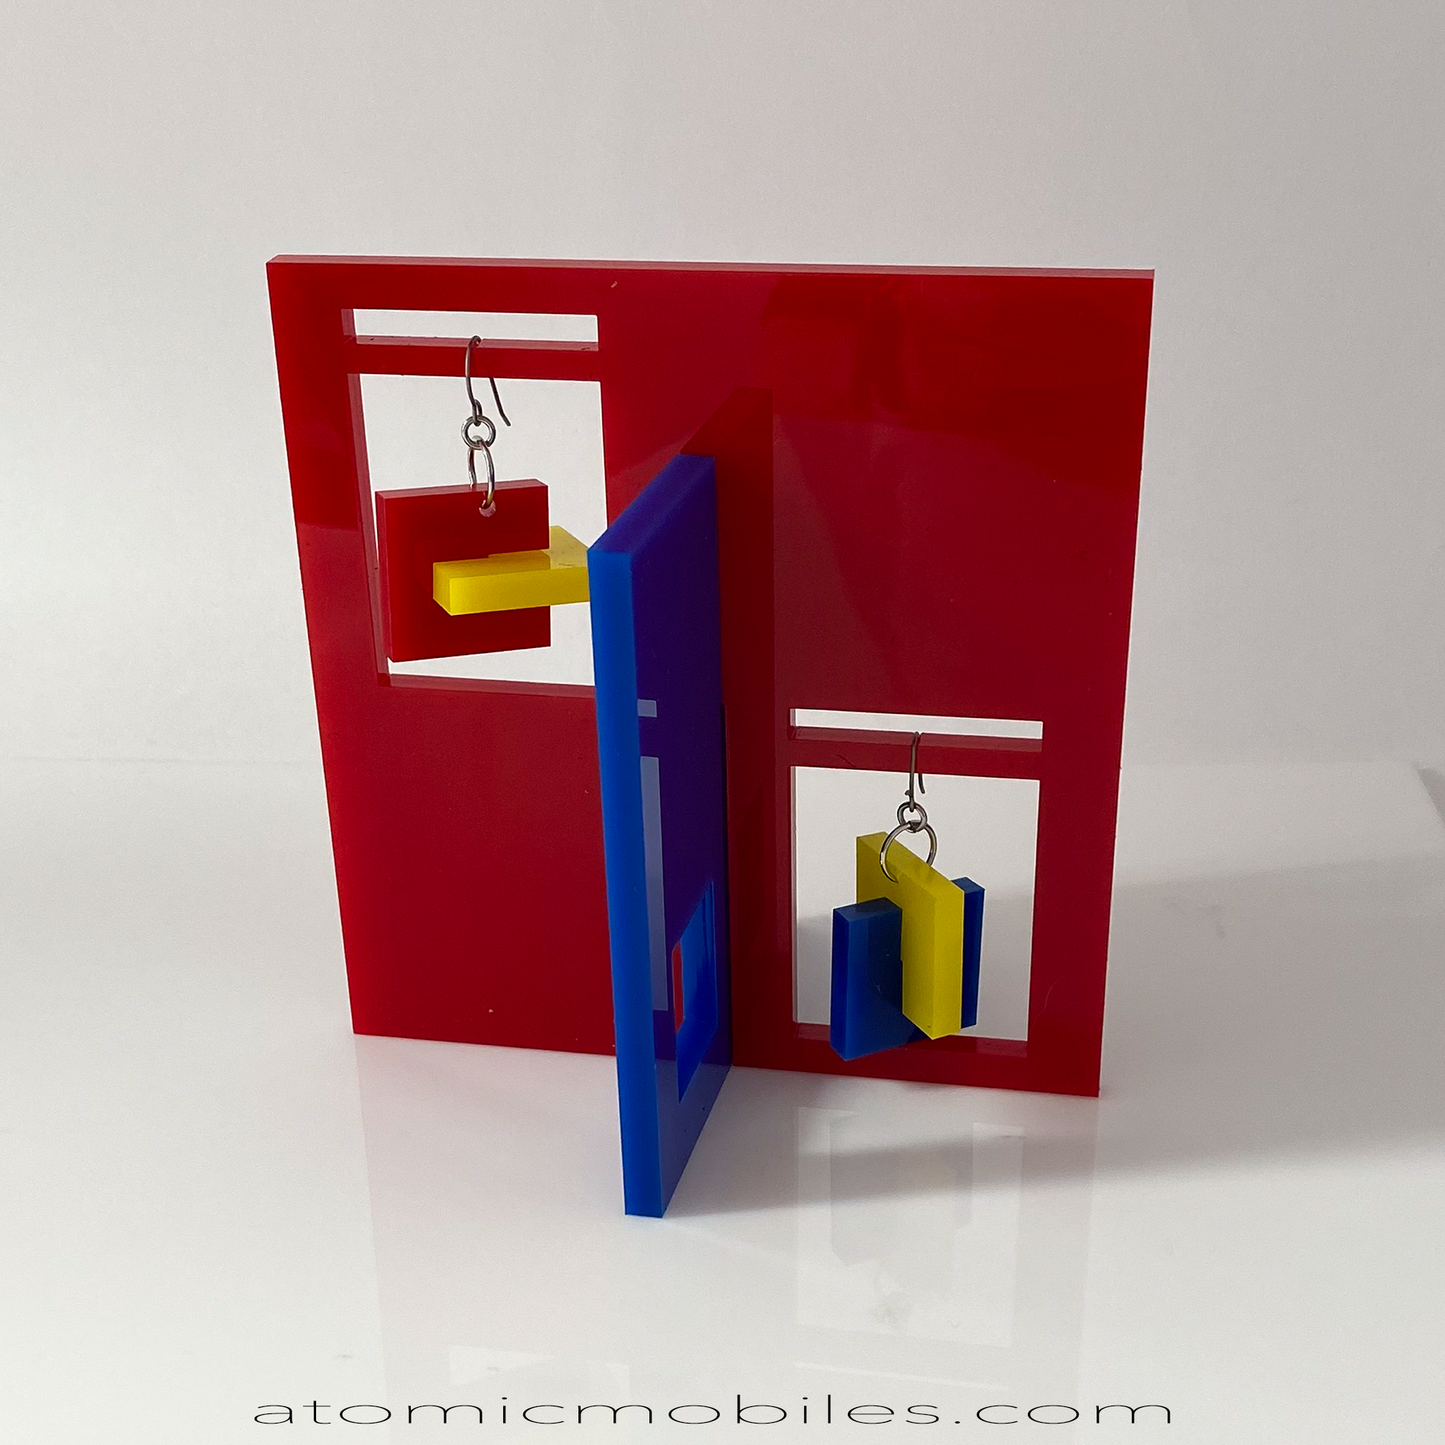 Mondrian Inspired Moderne Earrings and Art Stabile Set in red, blue and yellow - modern art sculpture stabile by AtomicMobiles.com